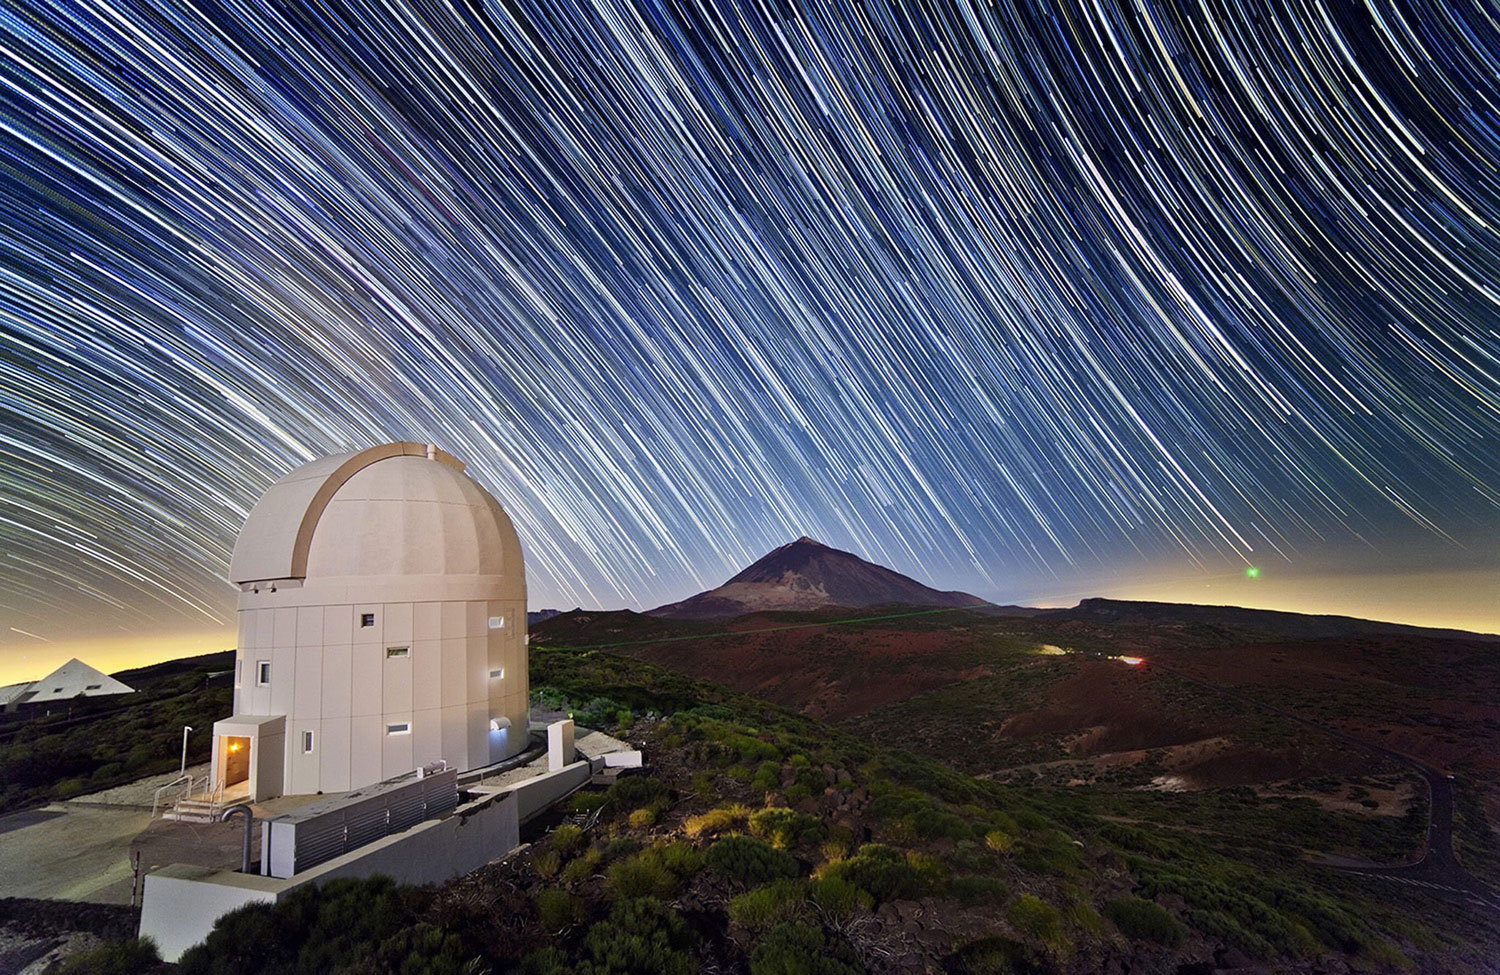 A long exposure of the European Space Agency's Optical Ground Station (OGS), at the La Teide Observatory on Tenerife, Canary Islands, Spain, released on April 27, 2014.